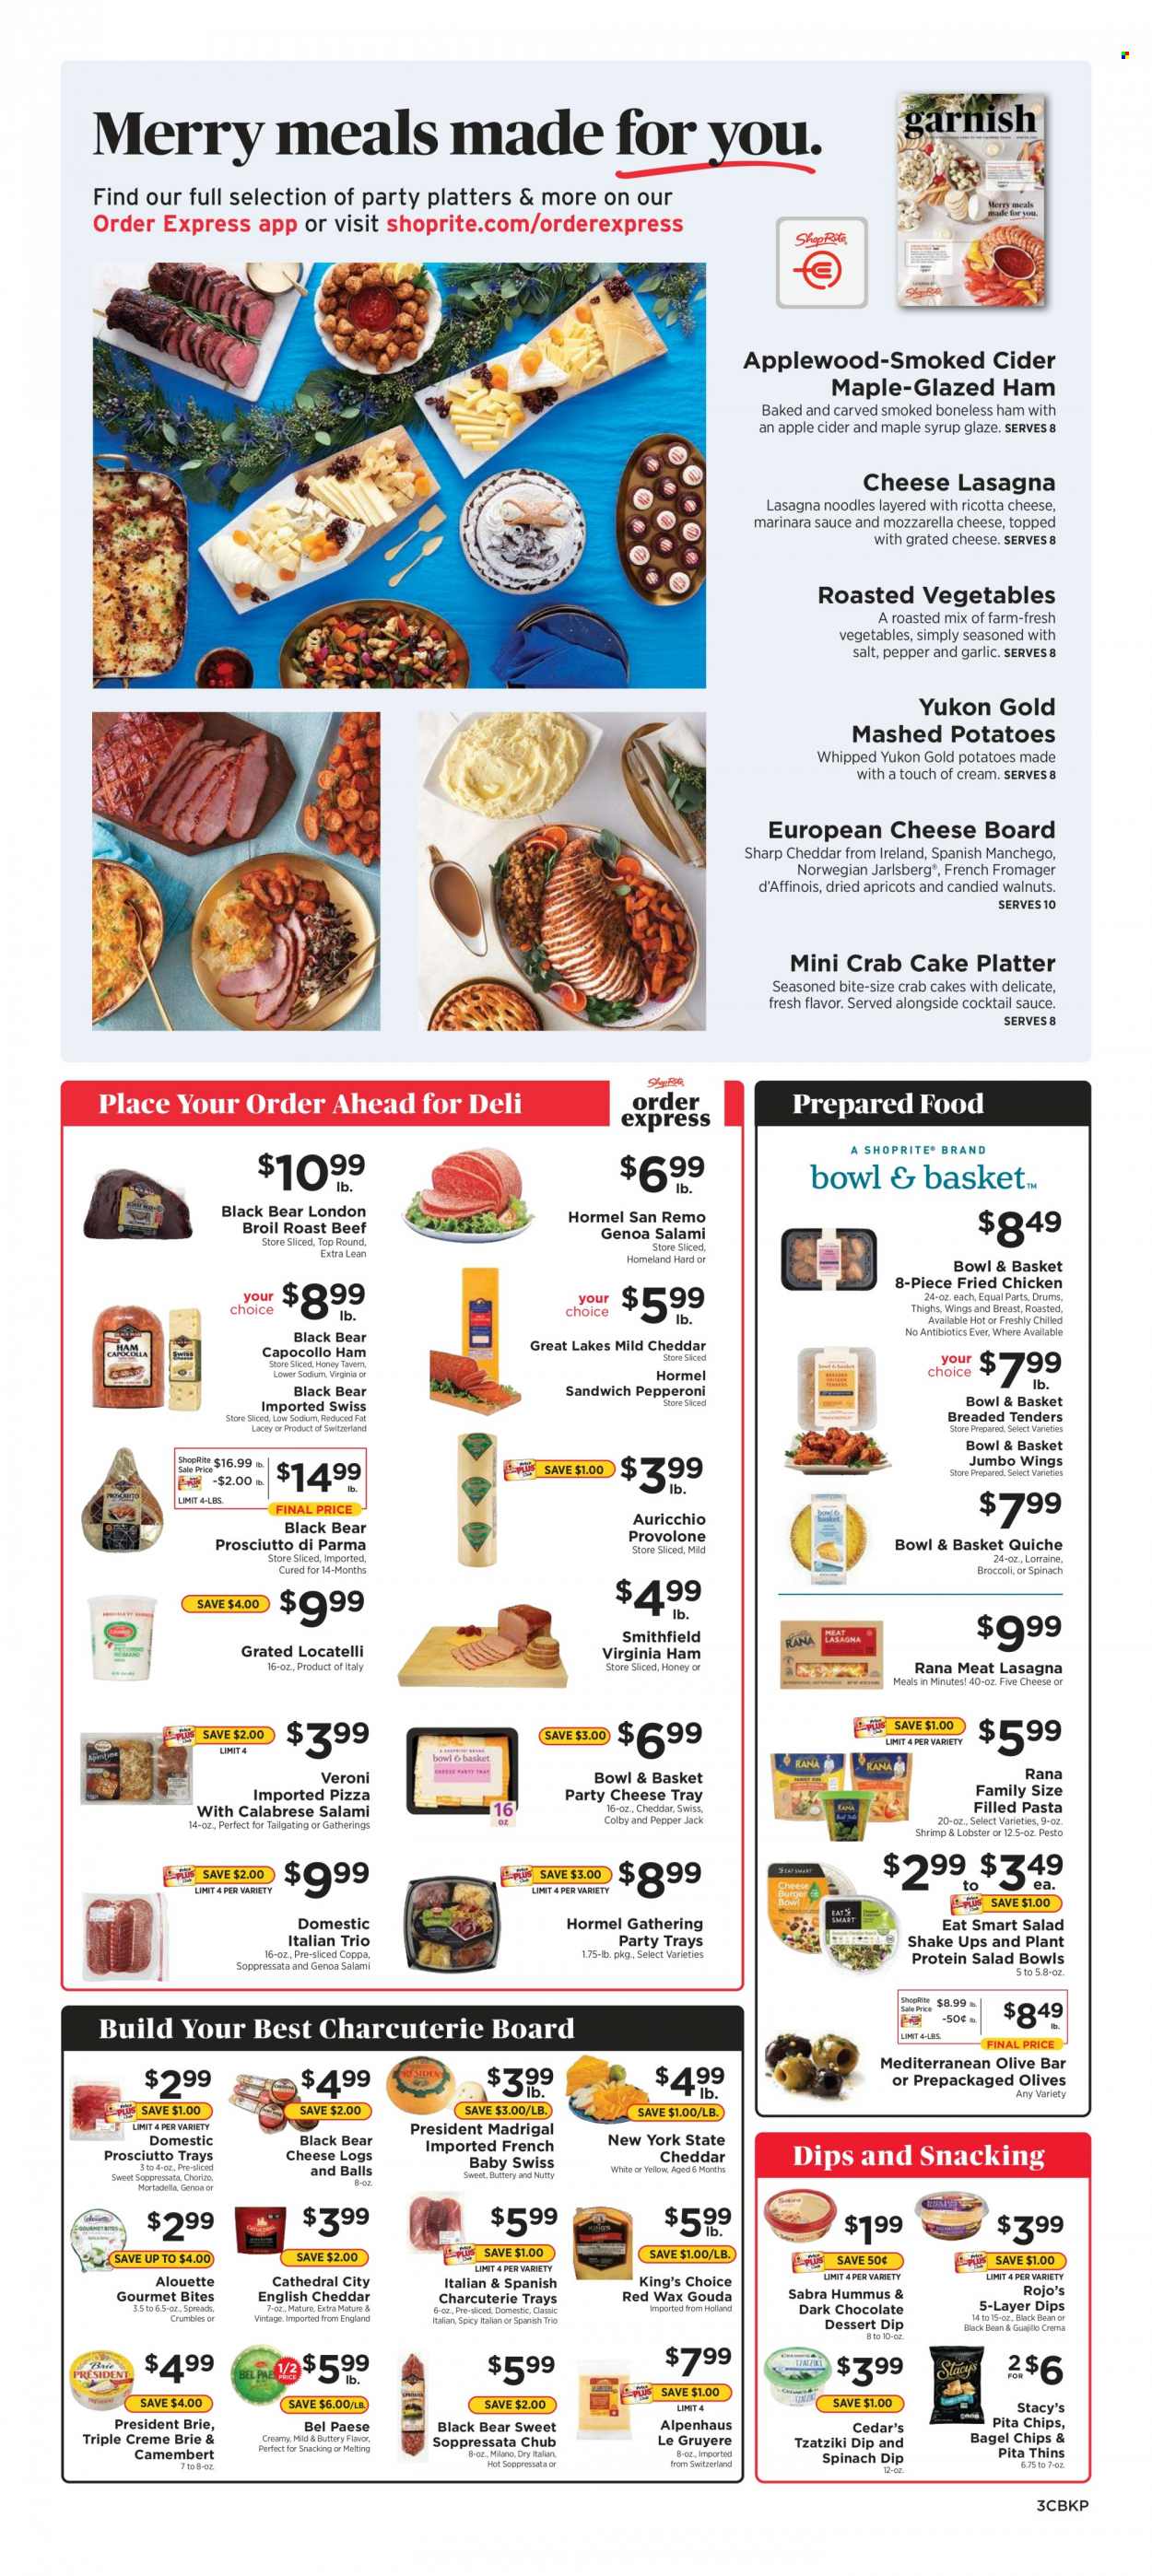 thumbnail - ShopRite Flyer - 12/19/2021 - 12/25/2021 - Sales products - bagels, Bowl & Basket, broccoli, garlic, apricots, lobster, shrimps, crab cake, mashed potatoes, pizza, sandwich, pasta, fried chicken, noodles, lasagna meal, Rana, Hormel, filled pasta, mortadella, salami, soppressata, ham, prosciutto, chorizo, virginia ham, pepperoni, tzatziki, hummus, camembert, Colby cheese, gouda, Gruyere, Manchego, mild cheddar, ricotta, Pepper Jack cheese, brie, grated cheese, Président, Provolone, shake, spinach dip, quiche, chocolate, dark chocolate, chips, Thins, pita chips, plant protein, olives, cocktail sauce, pesto, maple syrup, syrup, walnuts, dried fruit, apple cider, cider, beef meat, roast beef, salad bowl, cheese board. Page 3.